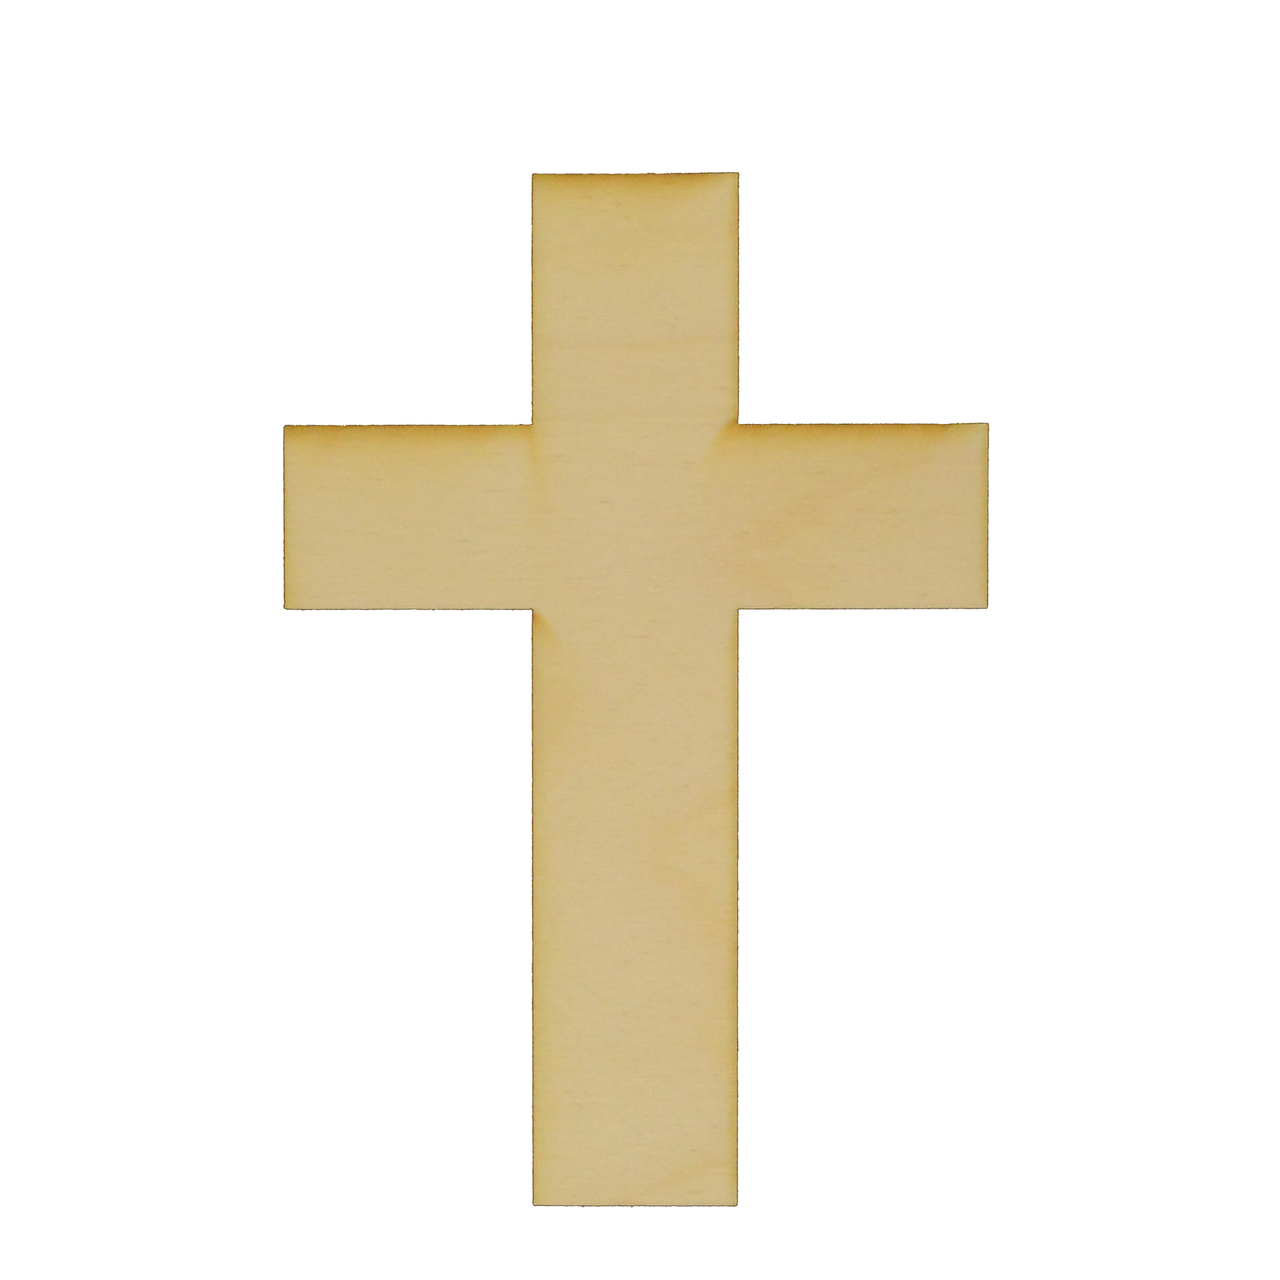 12 Pack Unfinished Wooden Cross Cutouts for Church, Sunday School